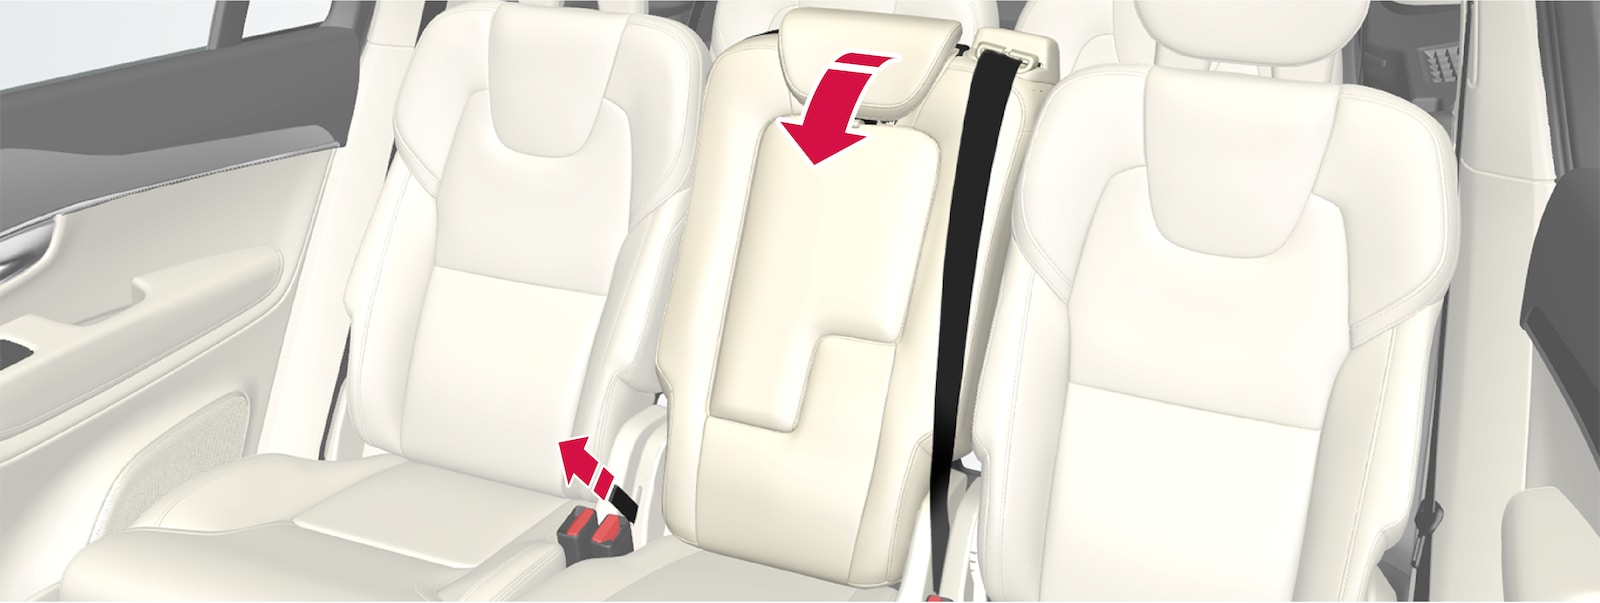 P5-1507-2nd seat row- Folding center seat with strap